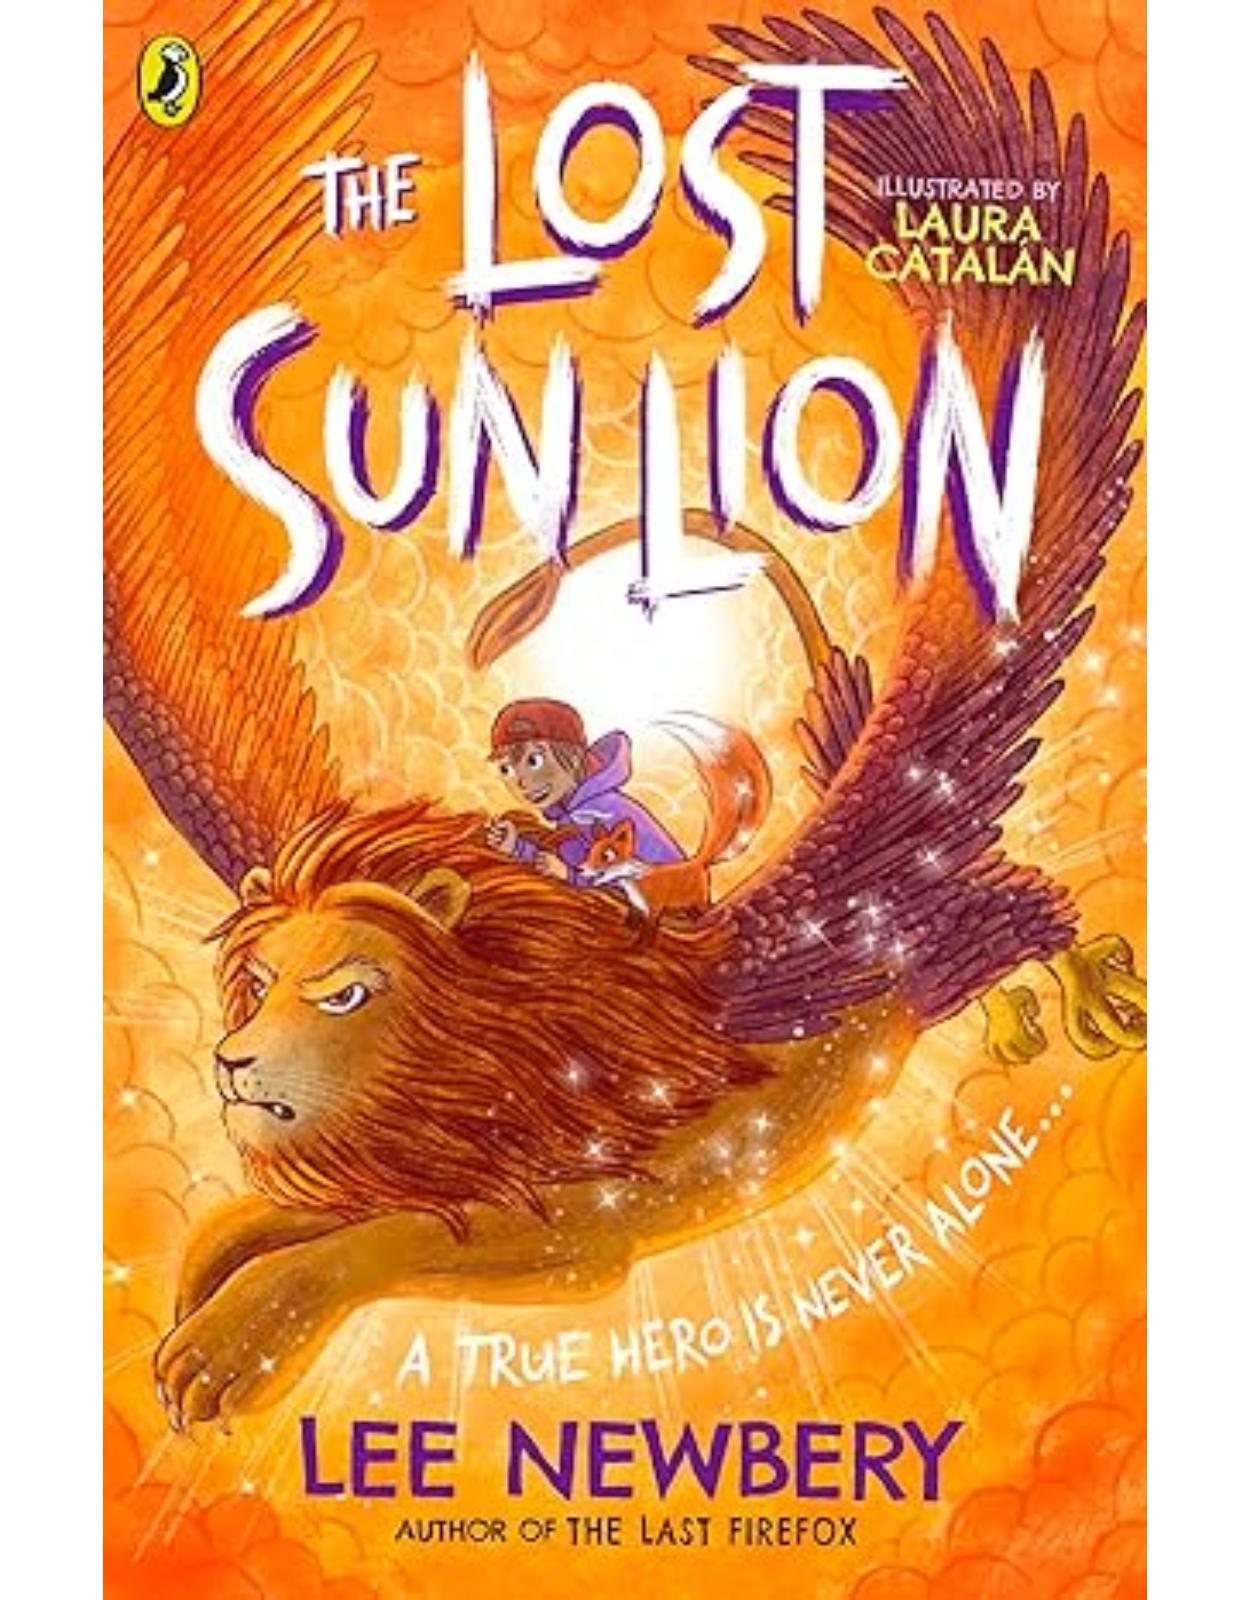 The Lost Sunlion